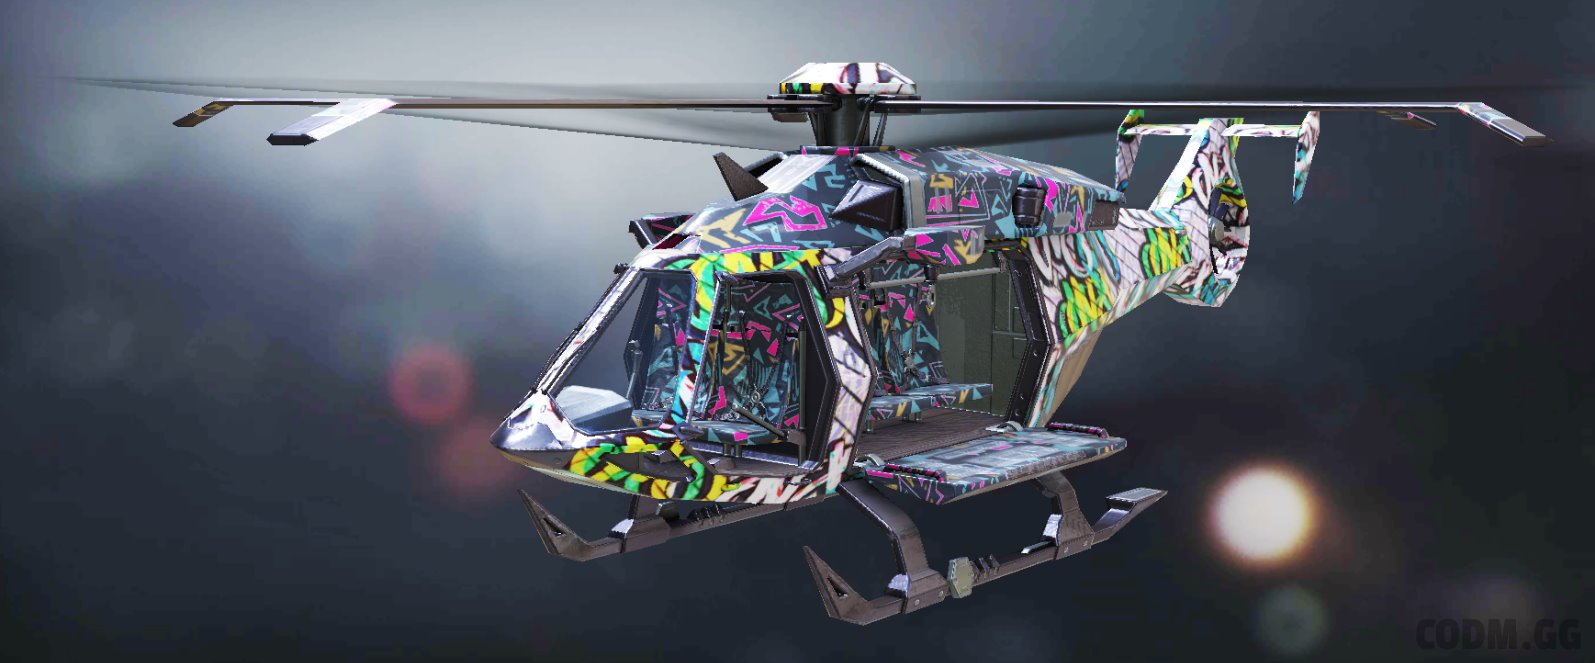 Helicopter Street Art, Rare camo in Call of Duty Mobile